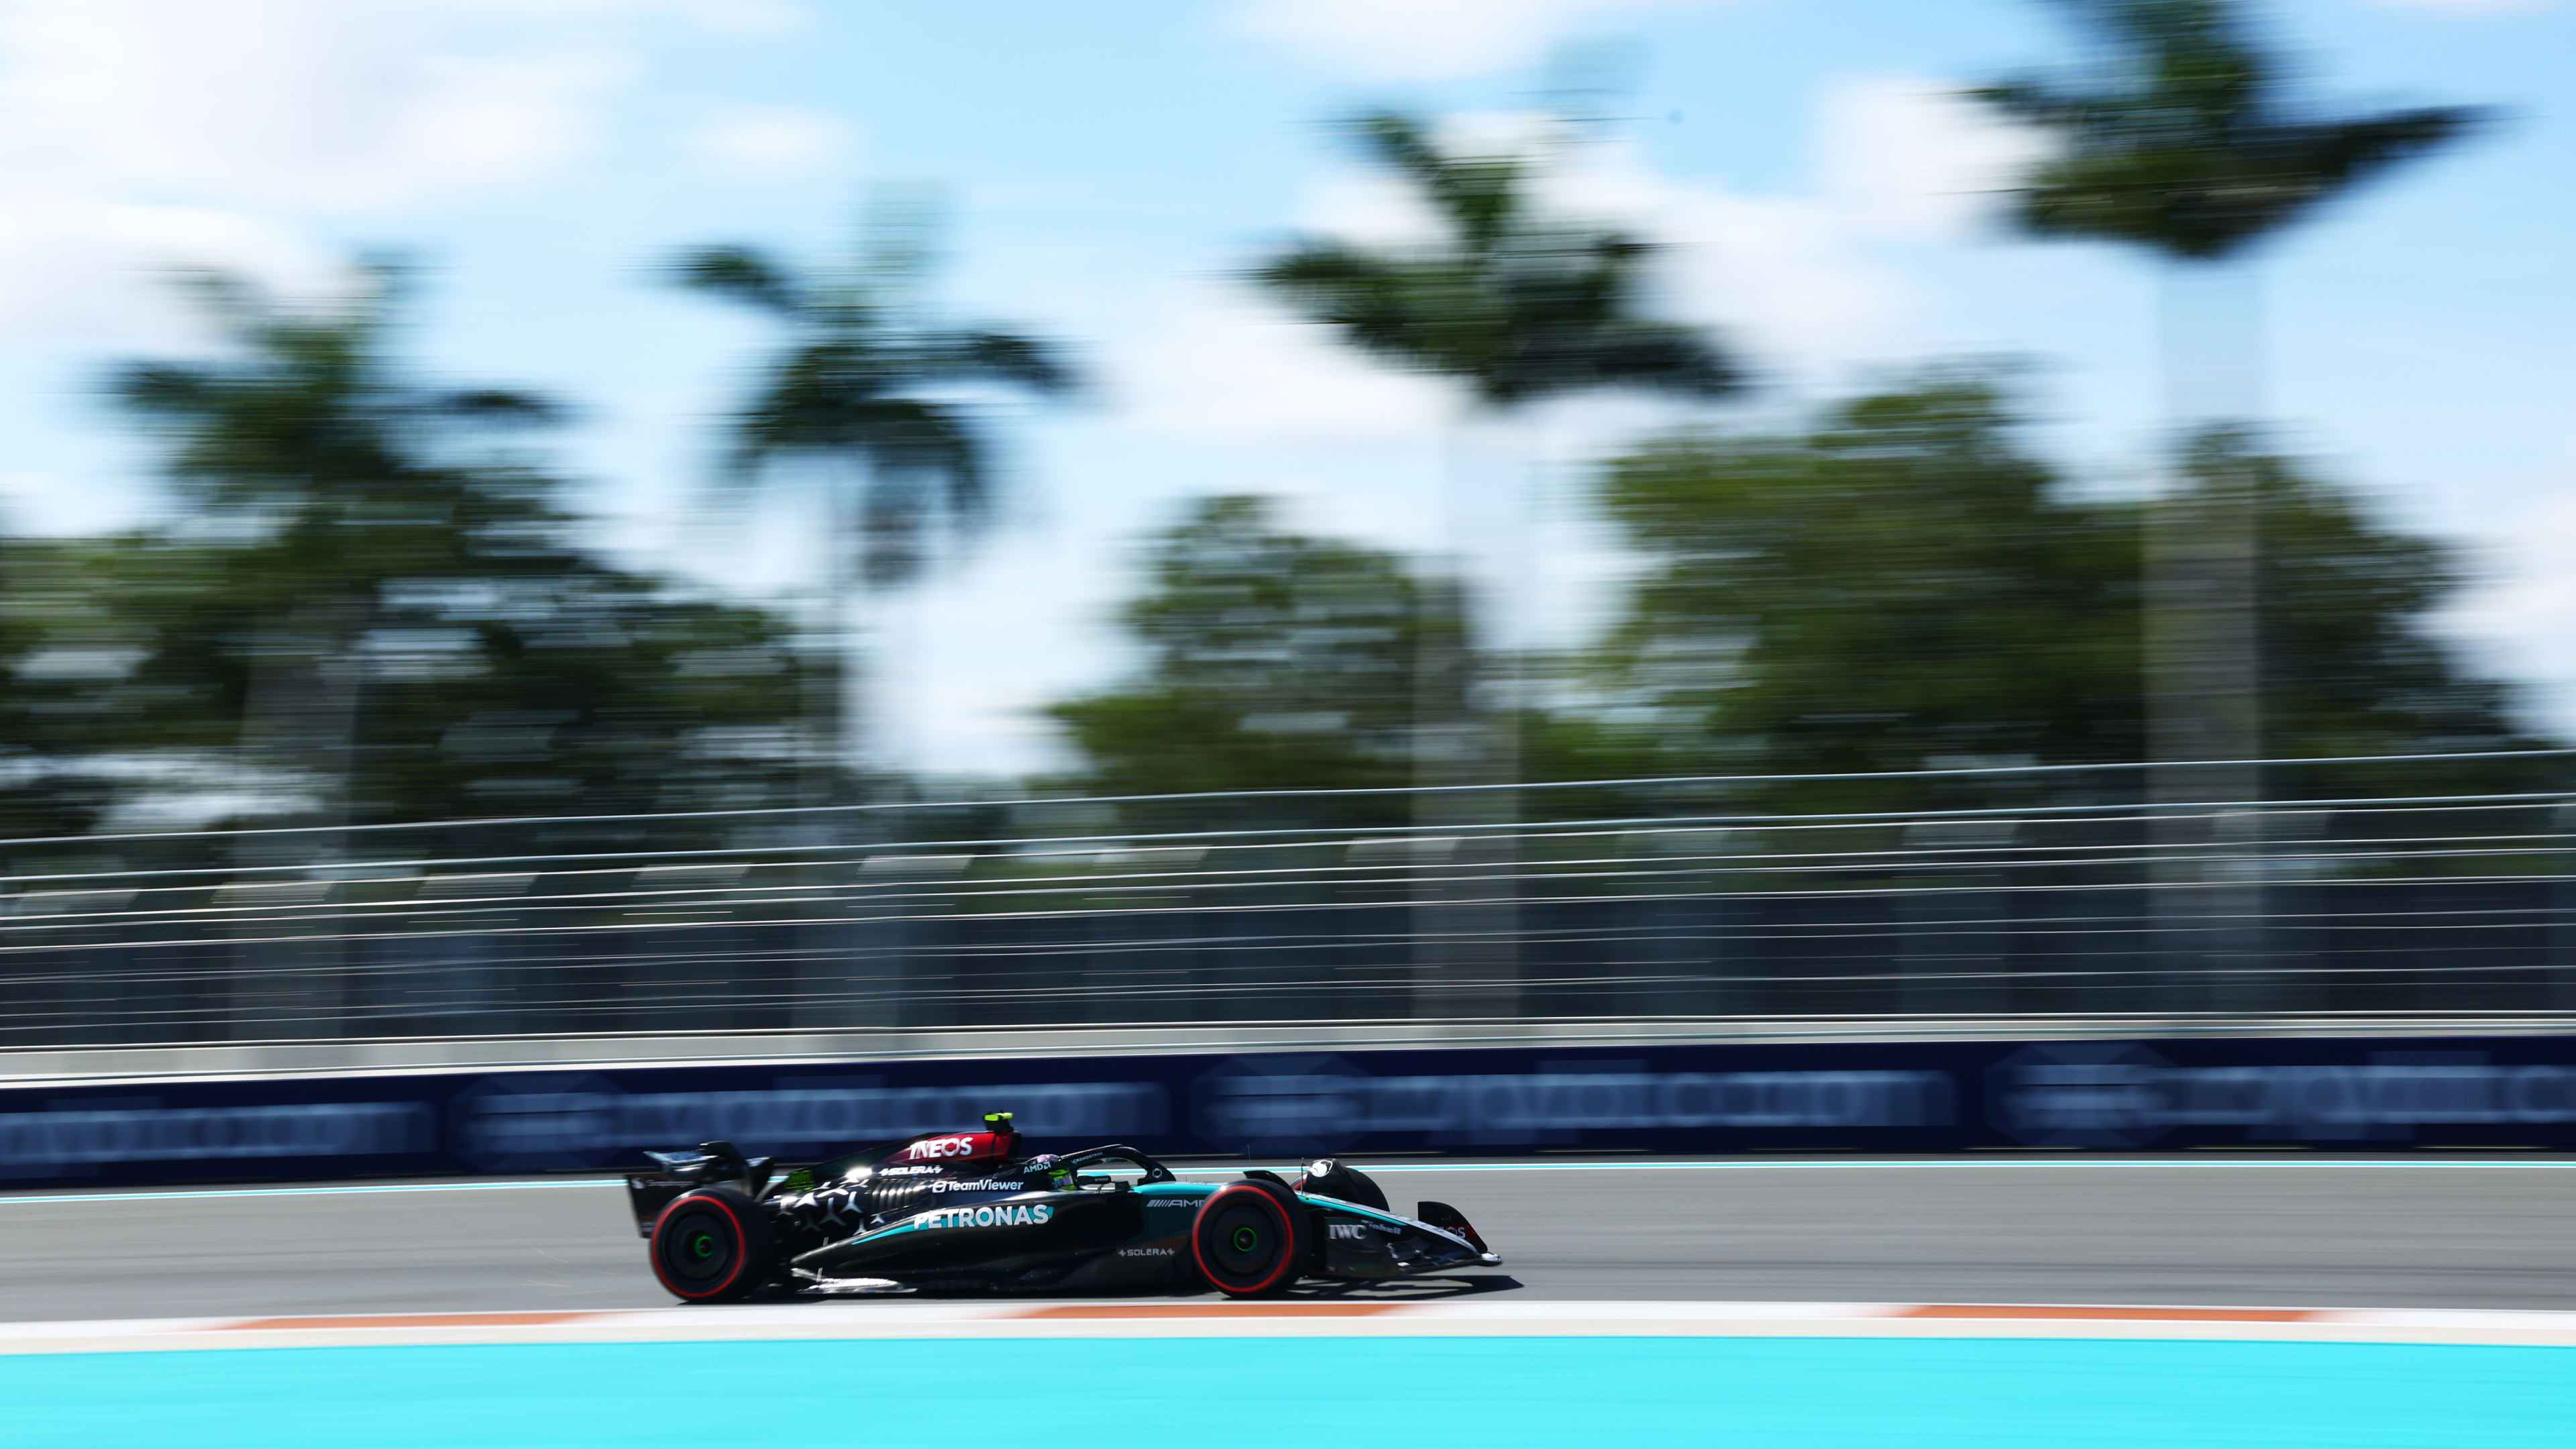 LIVE COVERAGE: Follow all the action from qualifying for the Miami Grand Prix